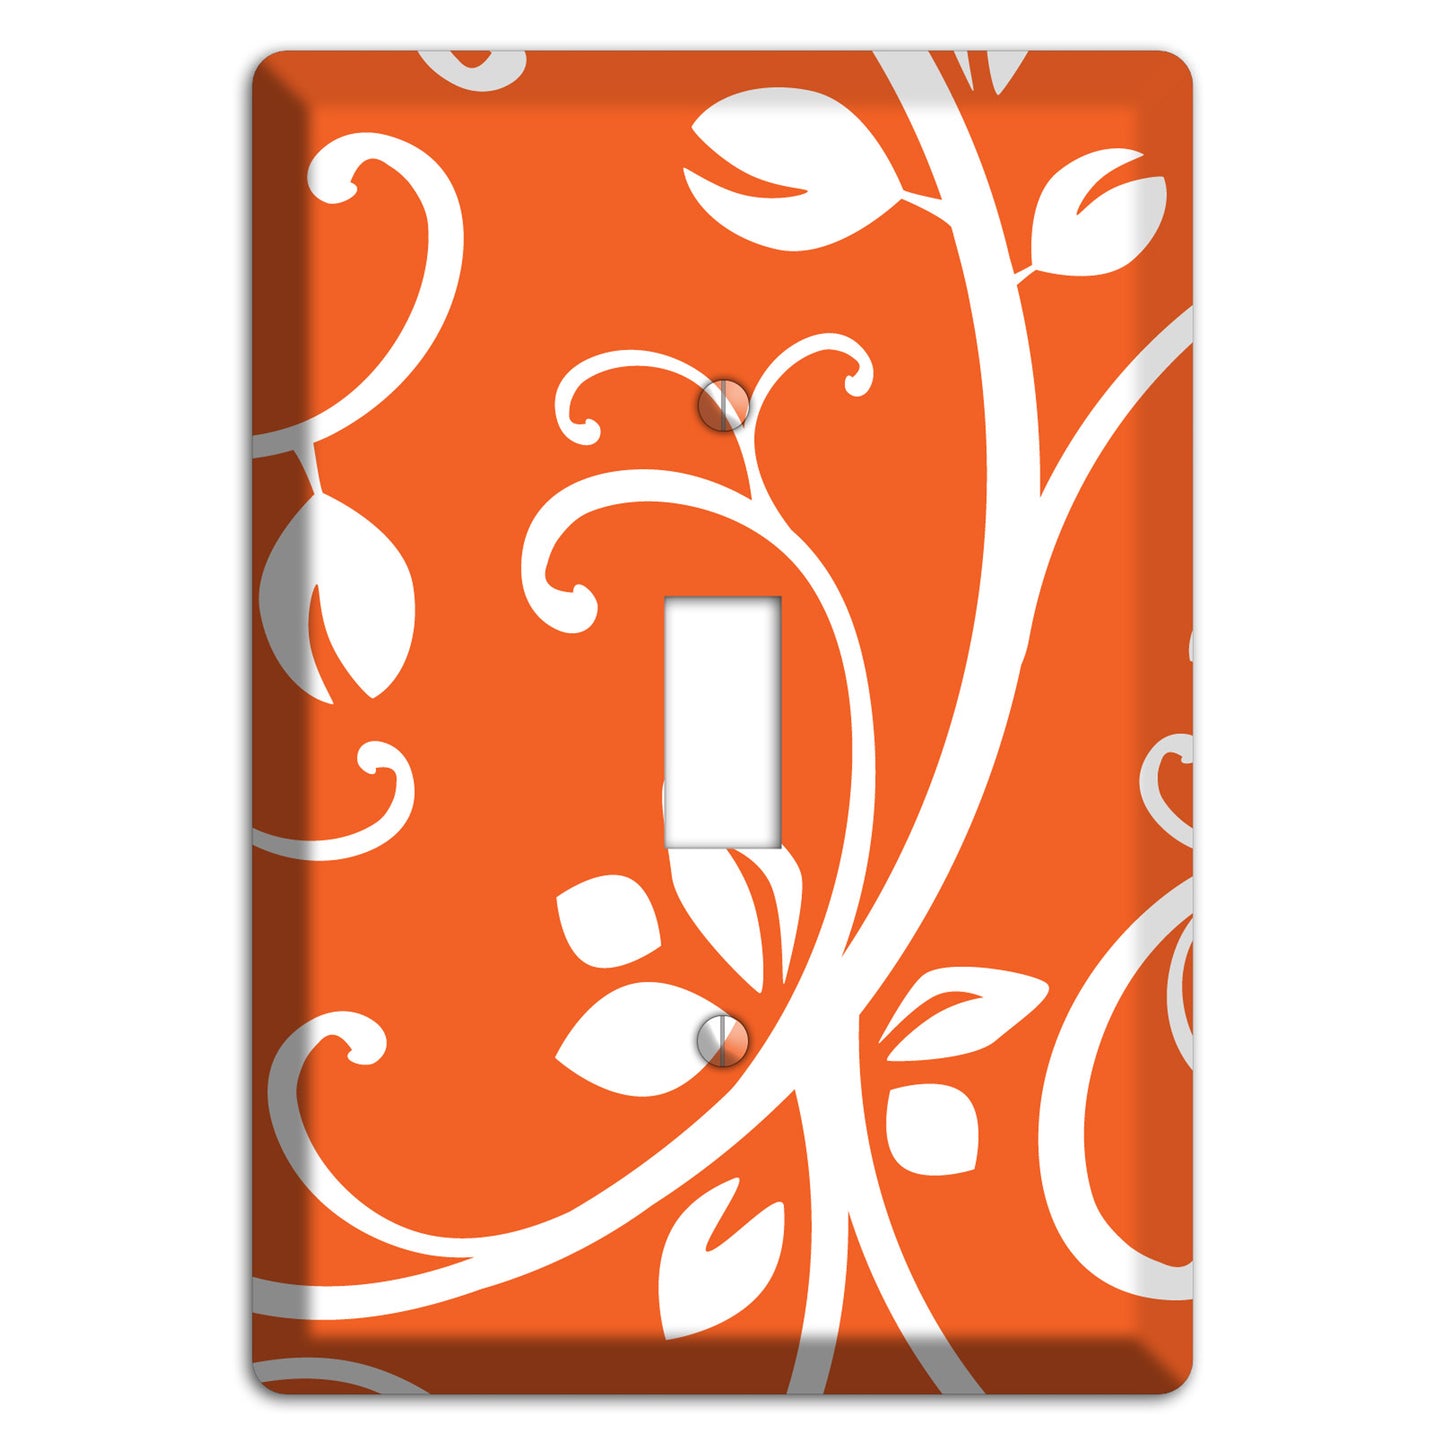 Red Bud Sprig Cover Plates